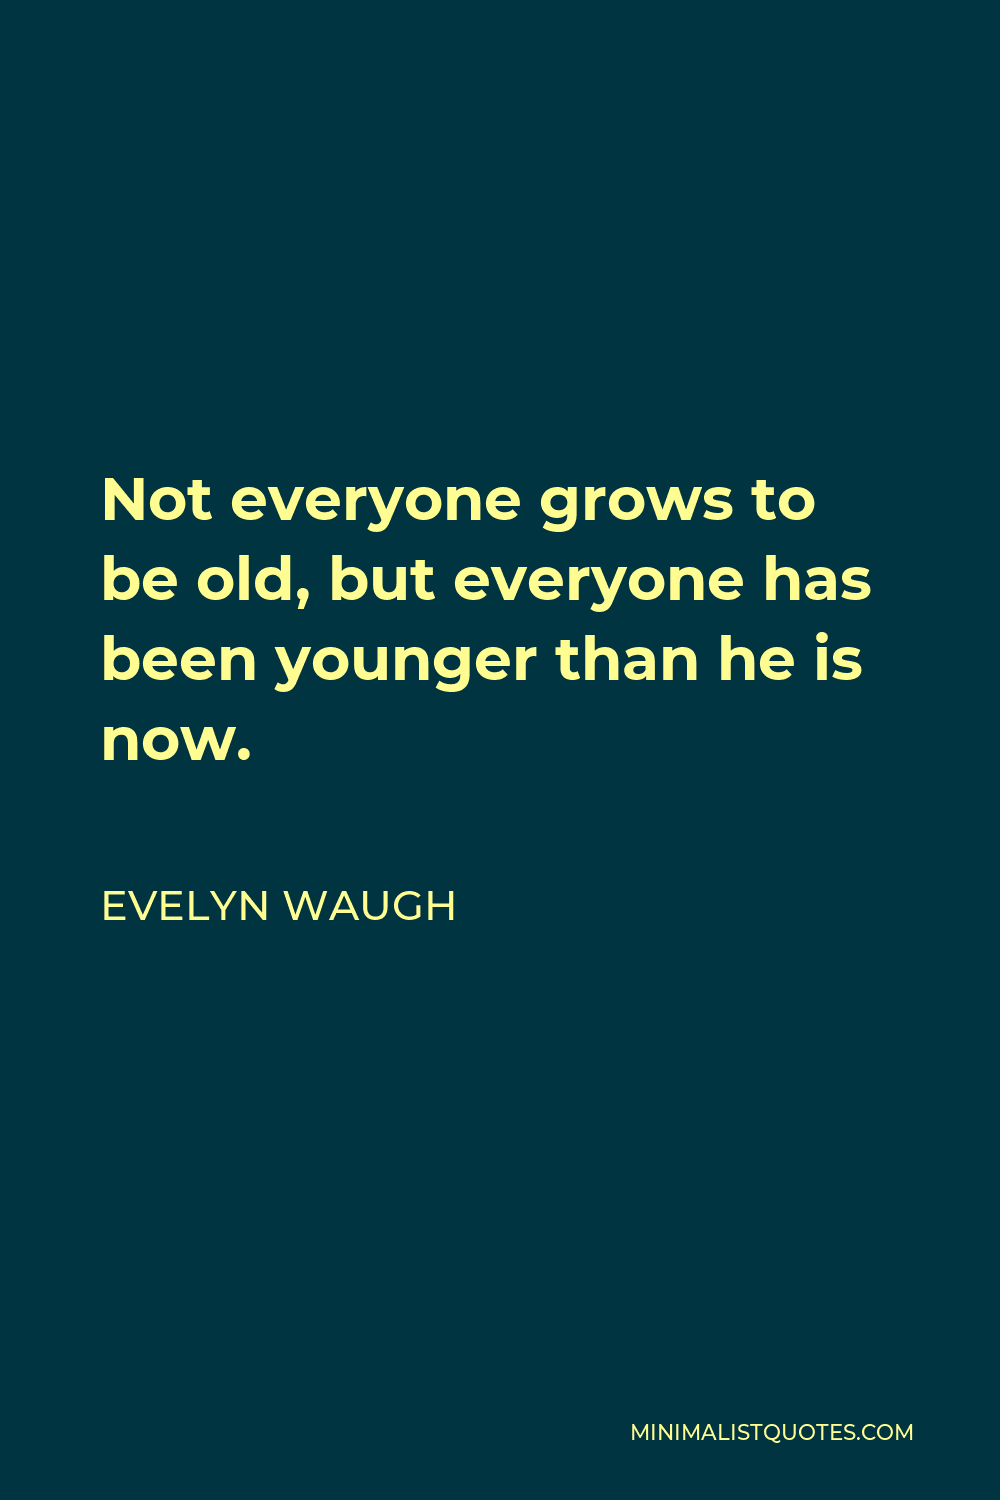 Evelyn Waugh Quote - Not everyone grows to be old, but everyone has been younger than he is now.